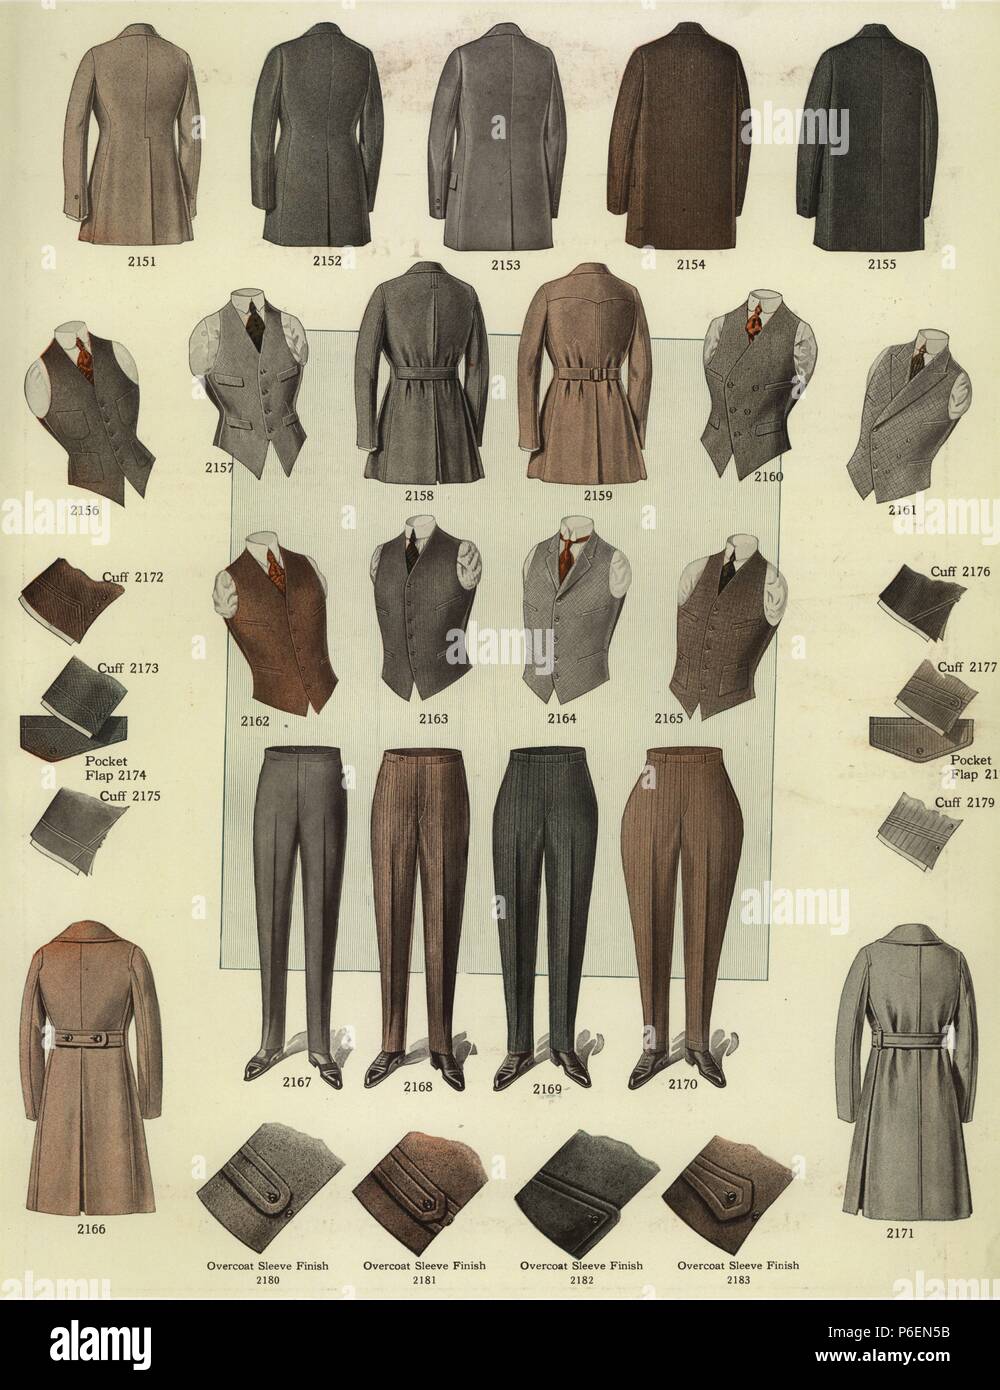 Men's fashions from the 1920s, including overcoats, vests, waistcoats,  trousers and spats and details of cuffs. Chromolithograph from a catalog of  male winter fashions from Bruner Woolens, 1920 Stock Photo - Alamy